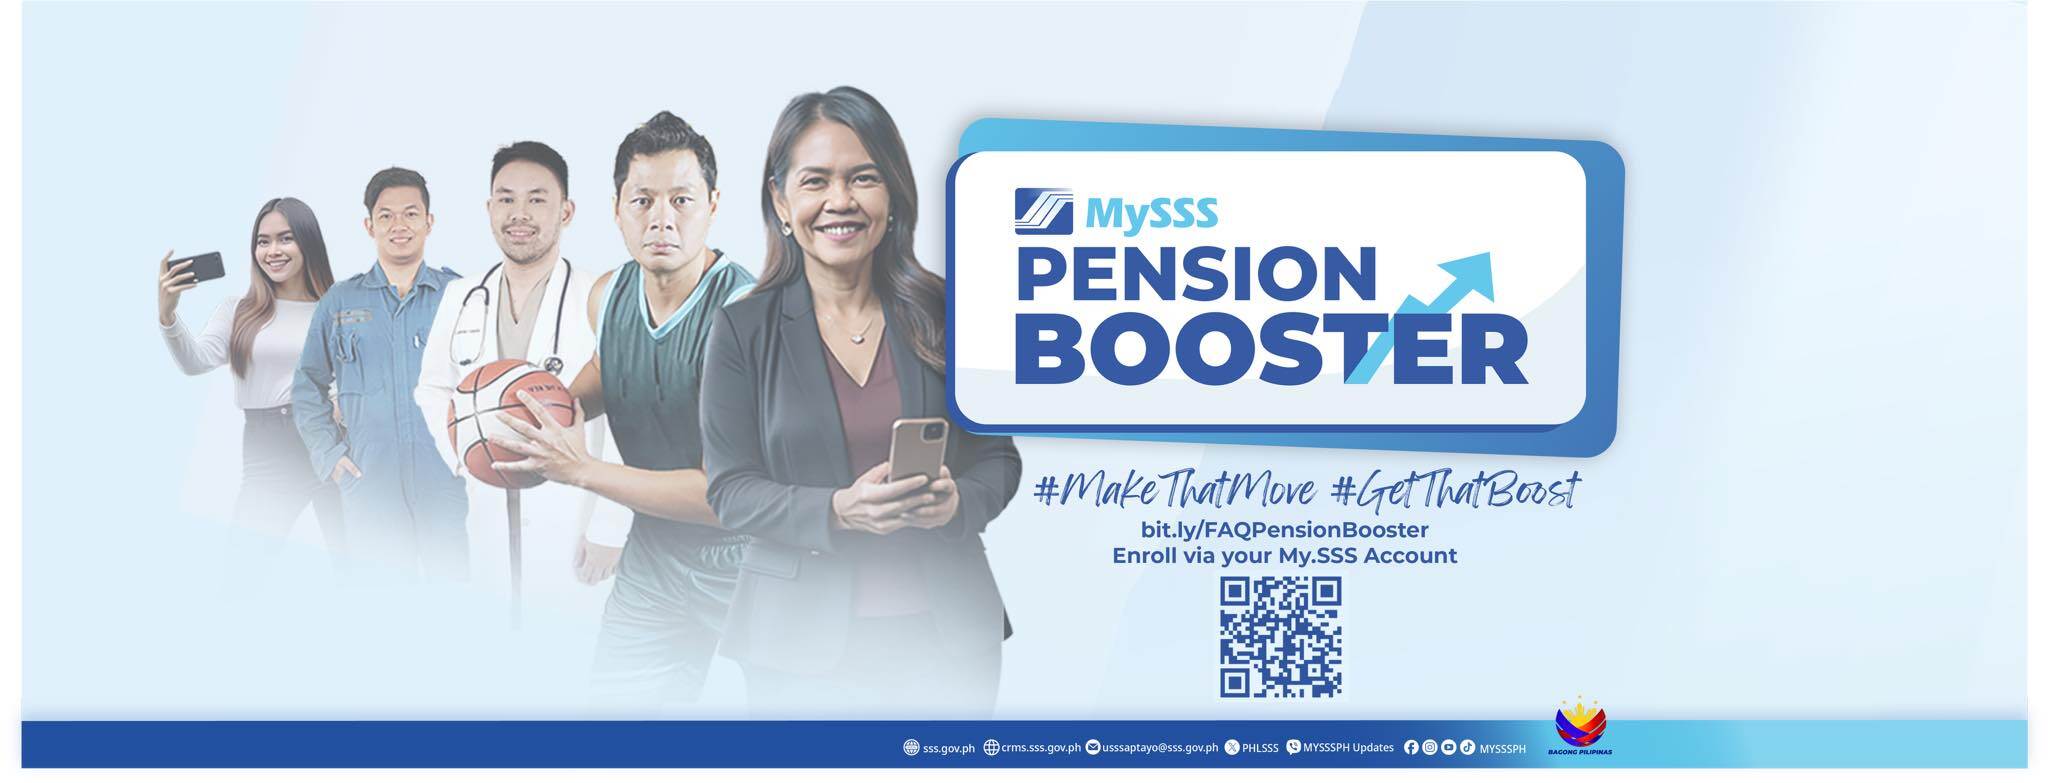 wisp sss contribution - how to apply for mandatory mysss pension booster 